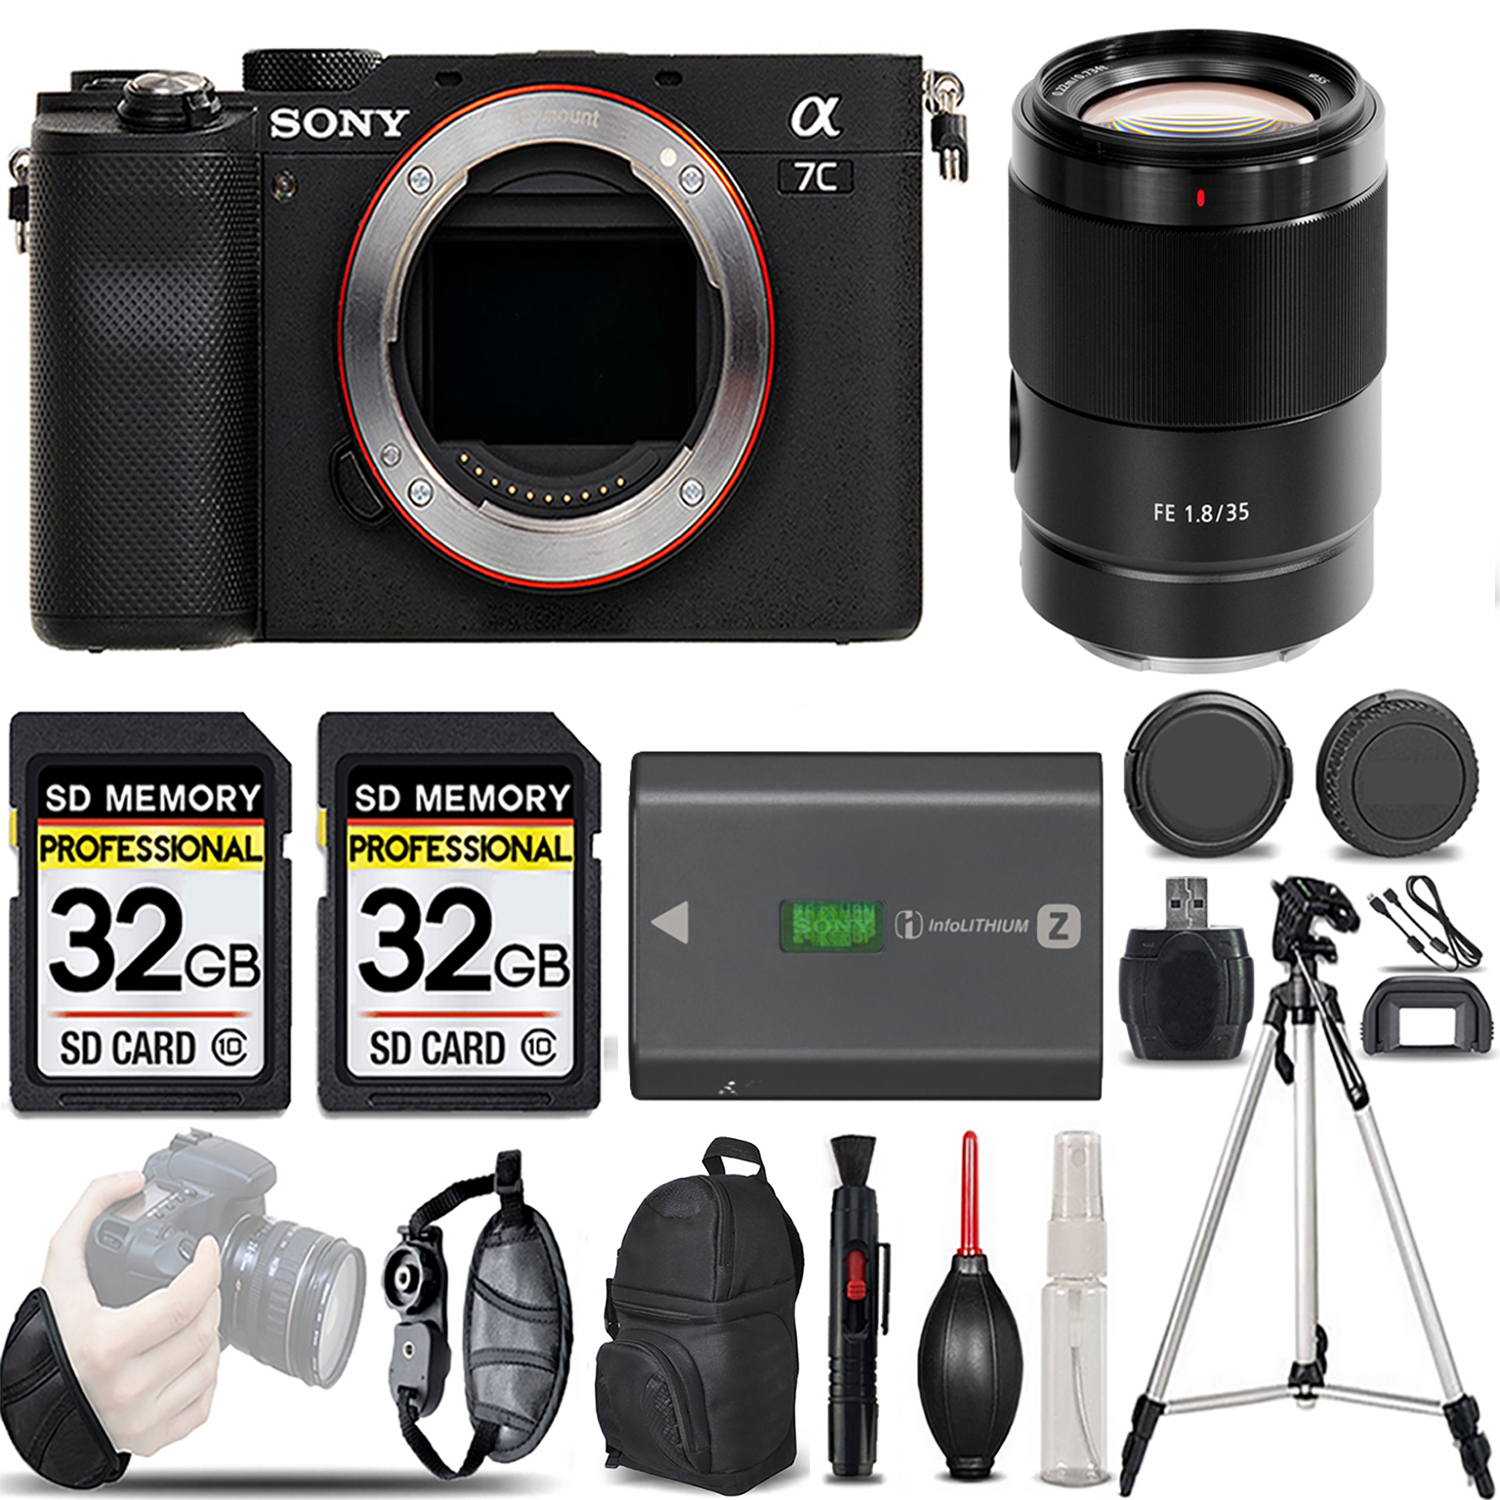 Alpha a7C Camera (Silver) + 35mm Lens + Extra Battery + Bag + 64Gb & More! *FREE SHIPPING*